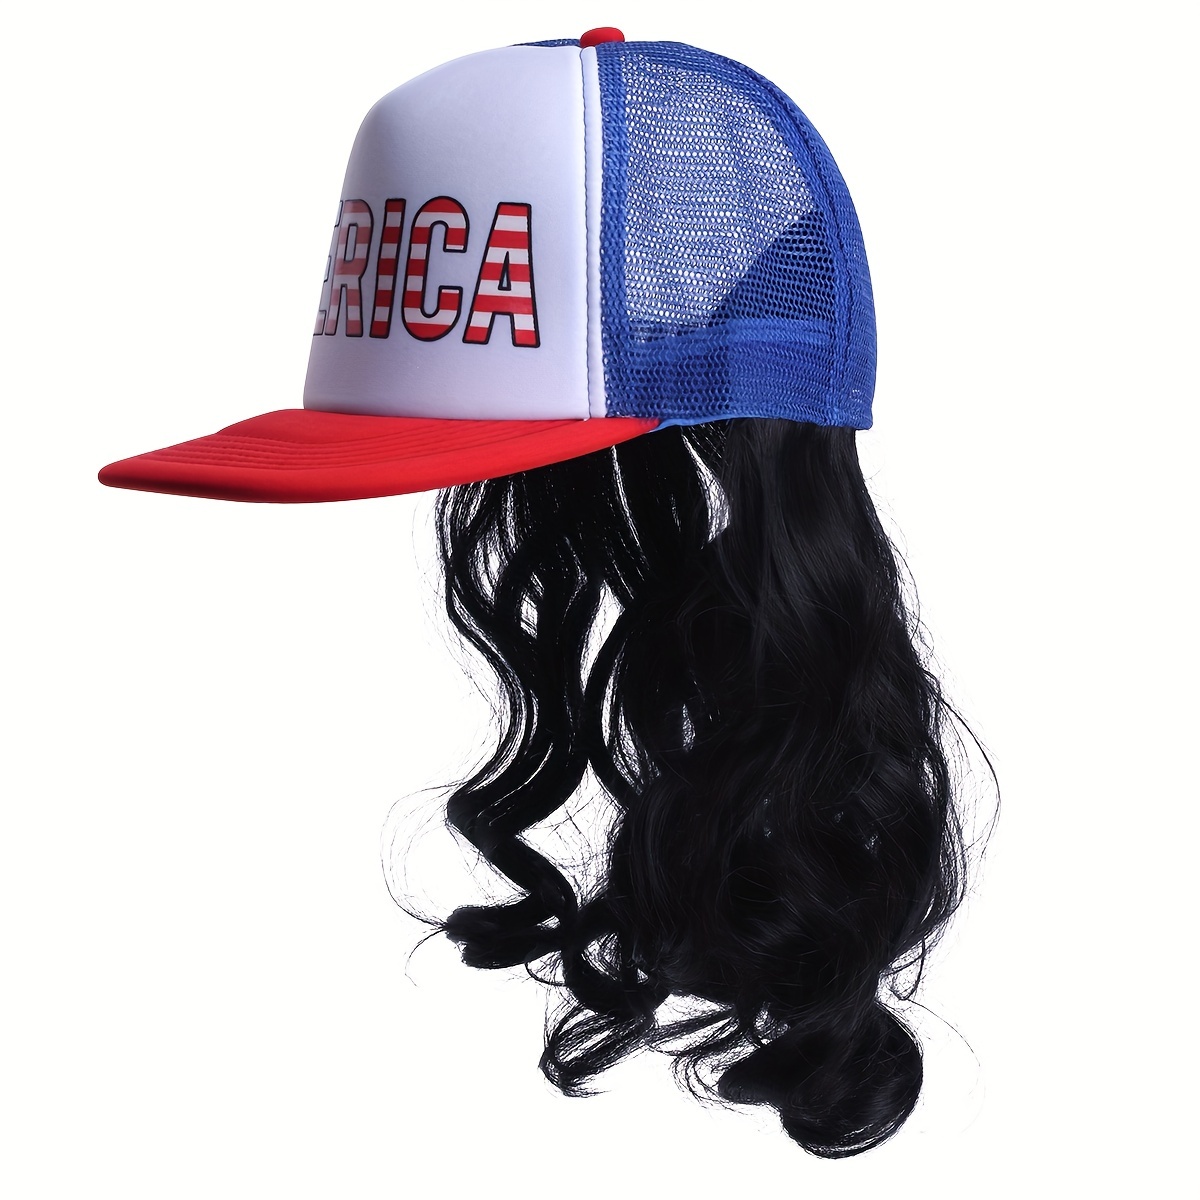 Unisex Loose Curly Hair Hat Adjustable Attached Hair Long Baseball Hairstyle Hair Wig Hiphop For Women Girls And Men Boys,Hairpiece